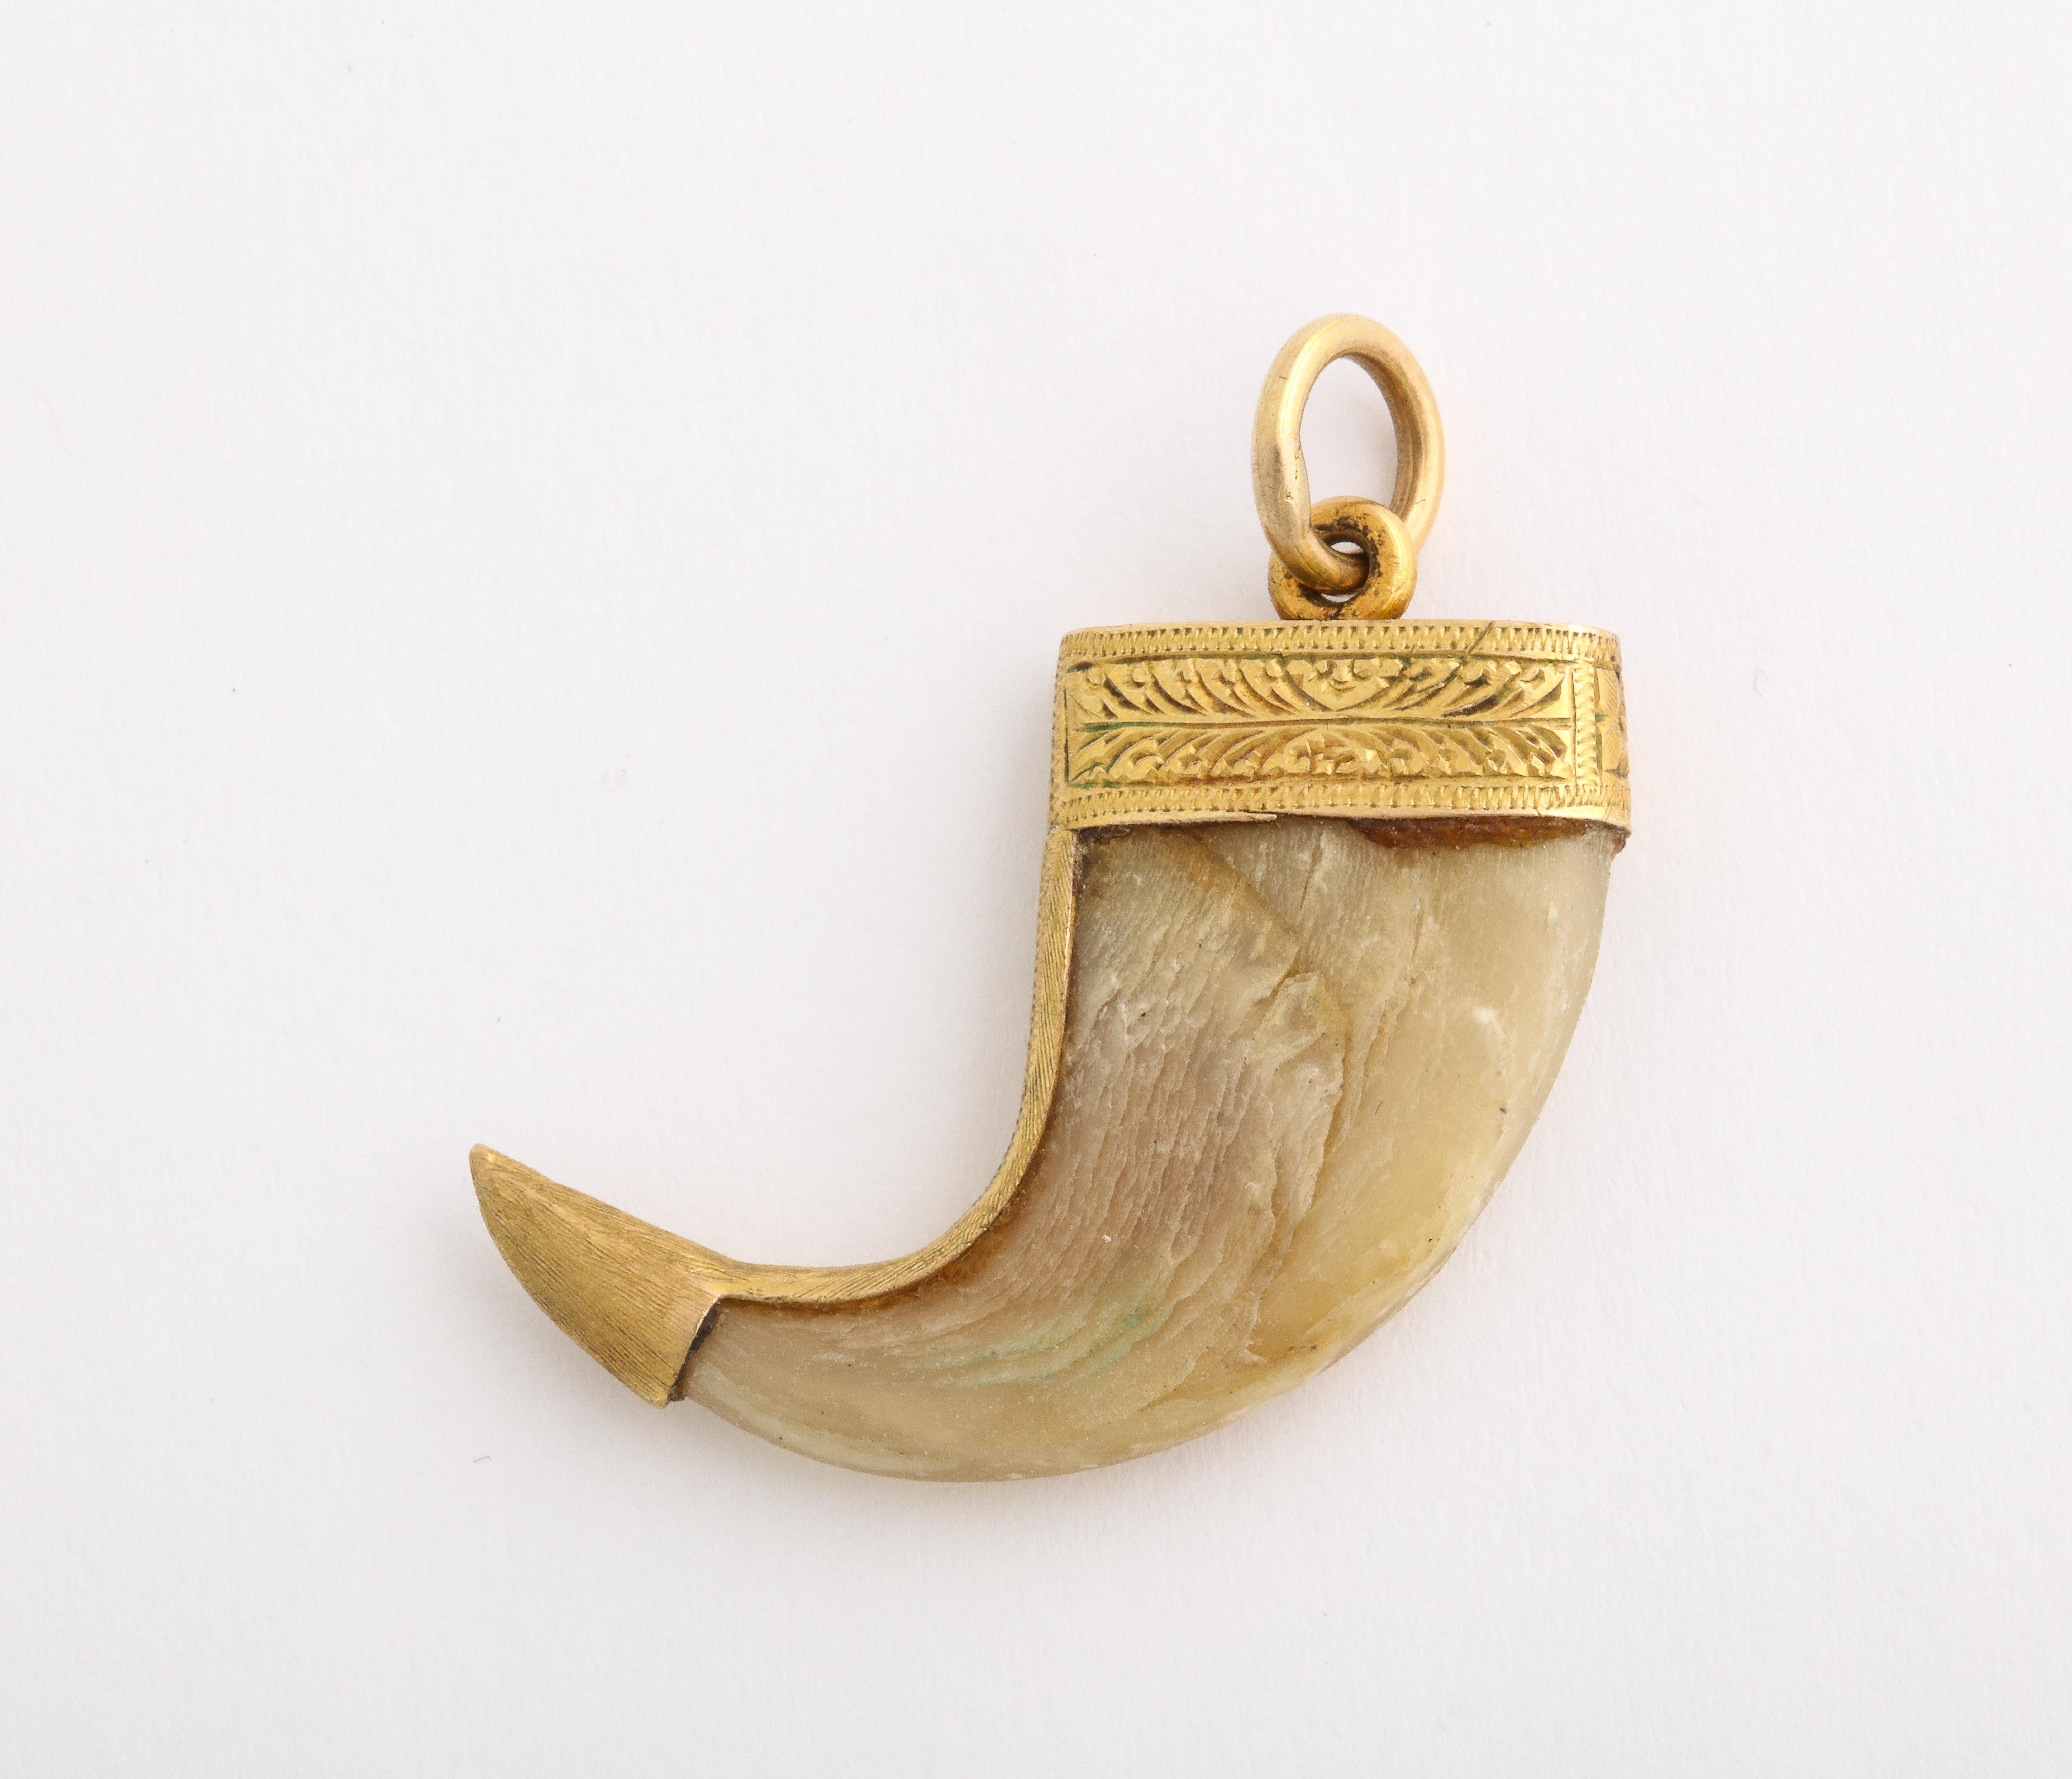 An actual tiger claw with gold trimmed decoration was made in the Victorian period during the control of India by Great Britain. The period was known as the British Raj. The tiger claw was worn over most of India as a sign of power and to ward off